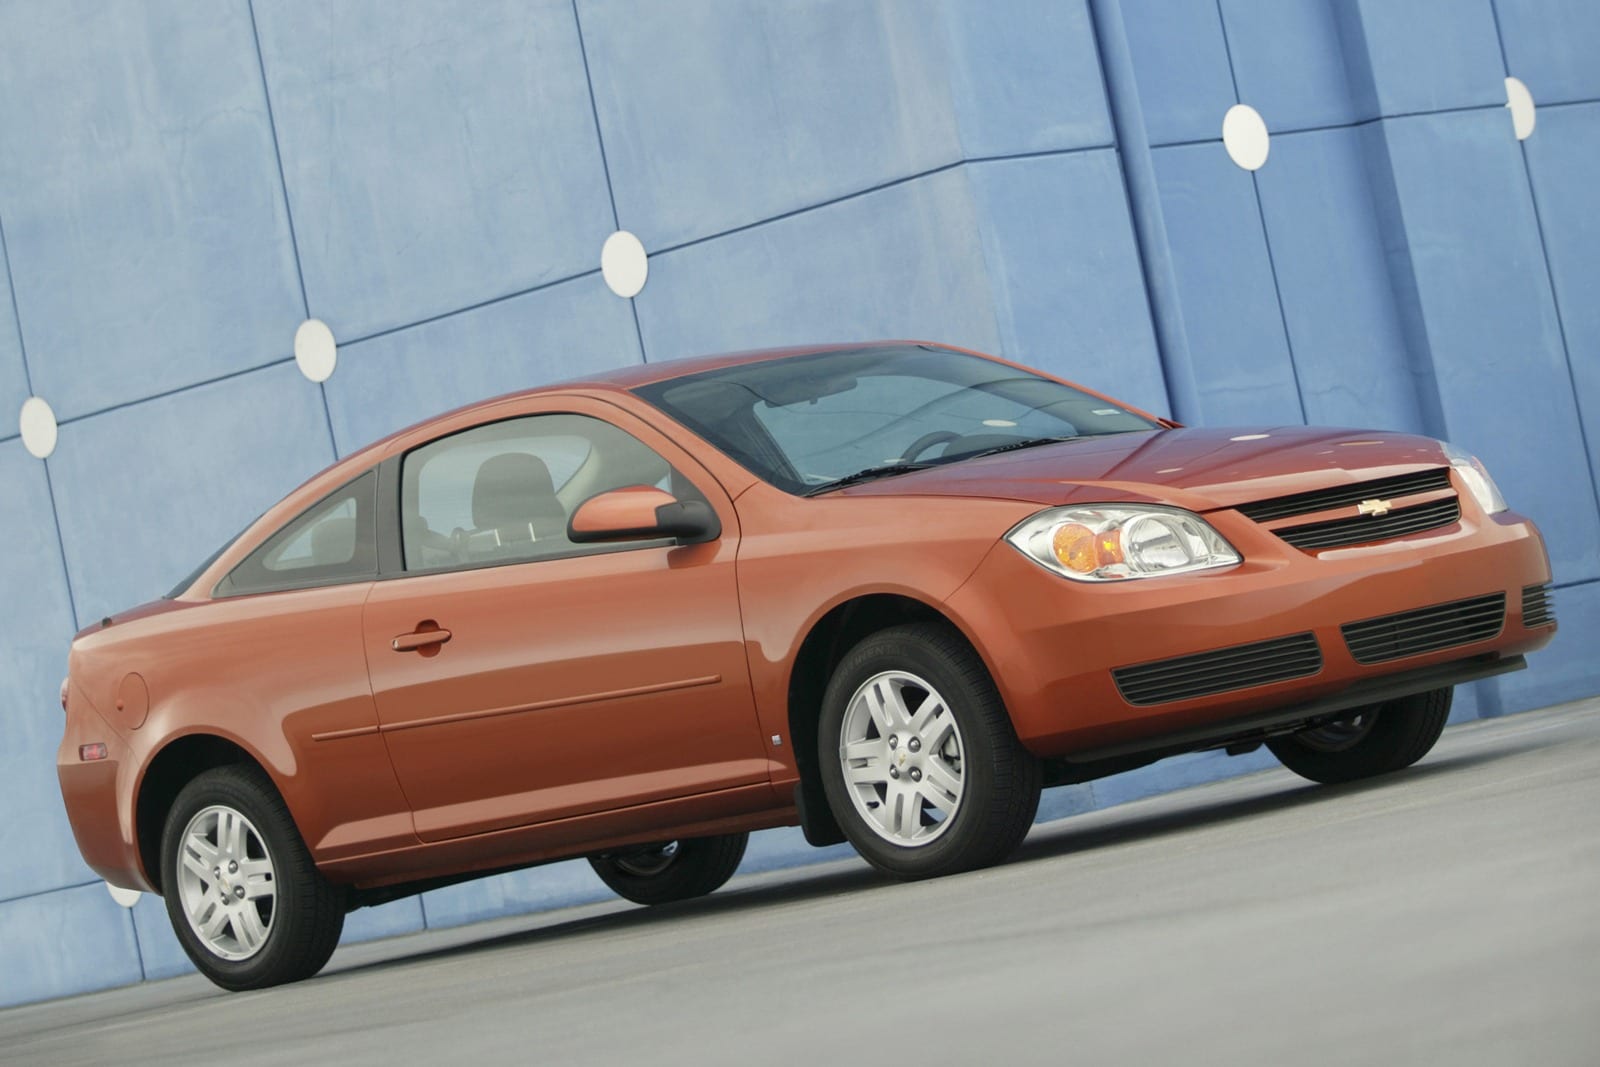 Used 2007 Chevrolet Cobalt Coupe Review | Edmunds